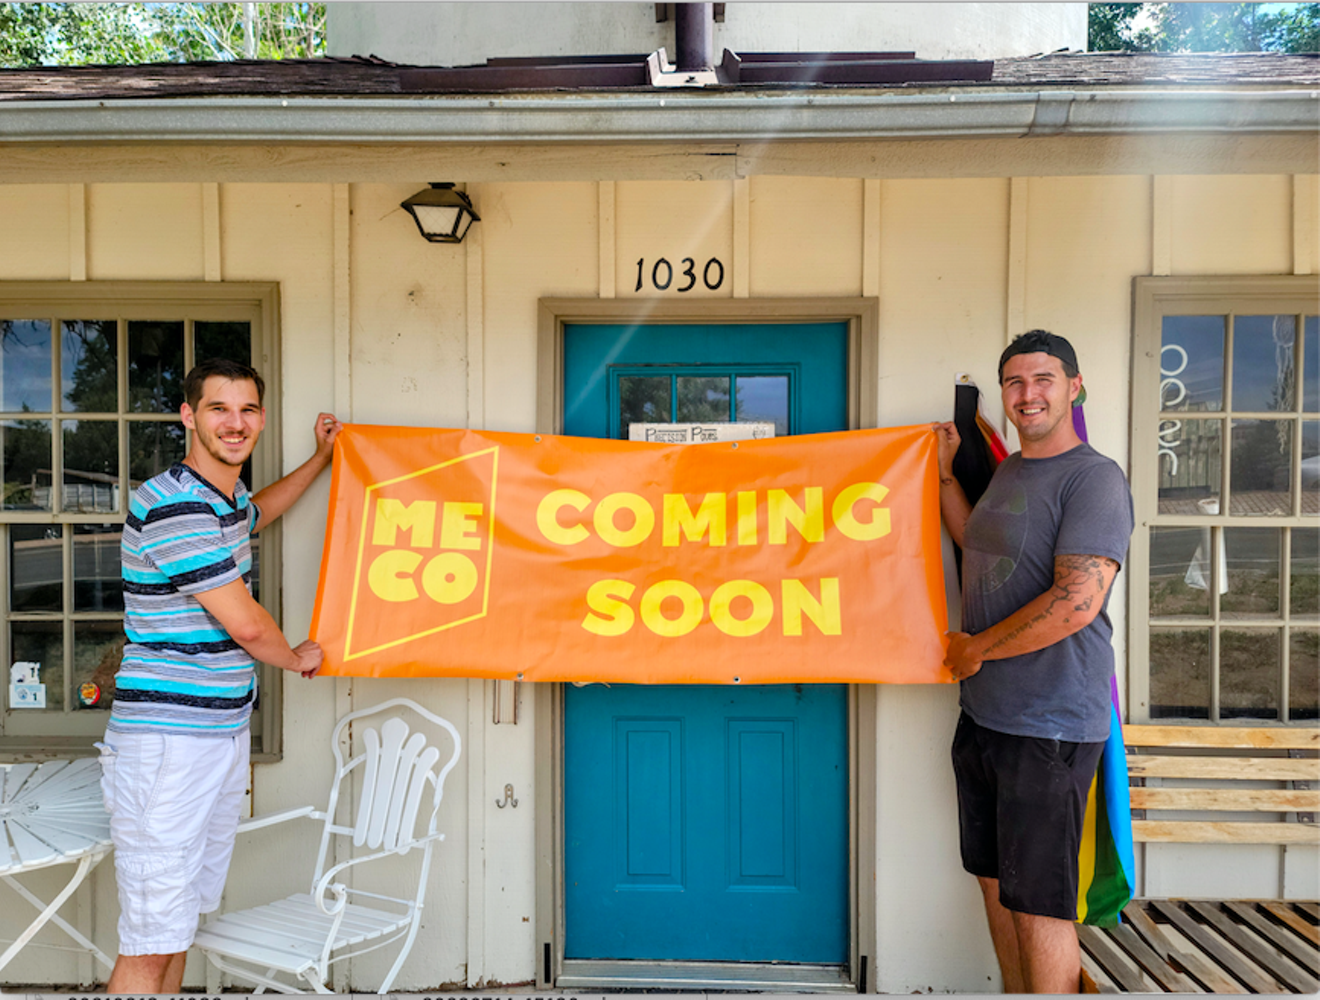 Shane Stinn (left) and Isaac Olson proudly announced the new location in July; it opened August 1.